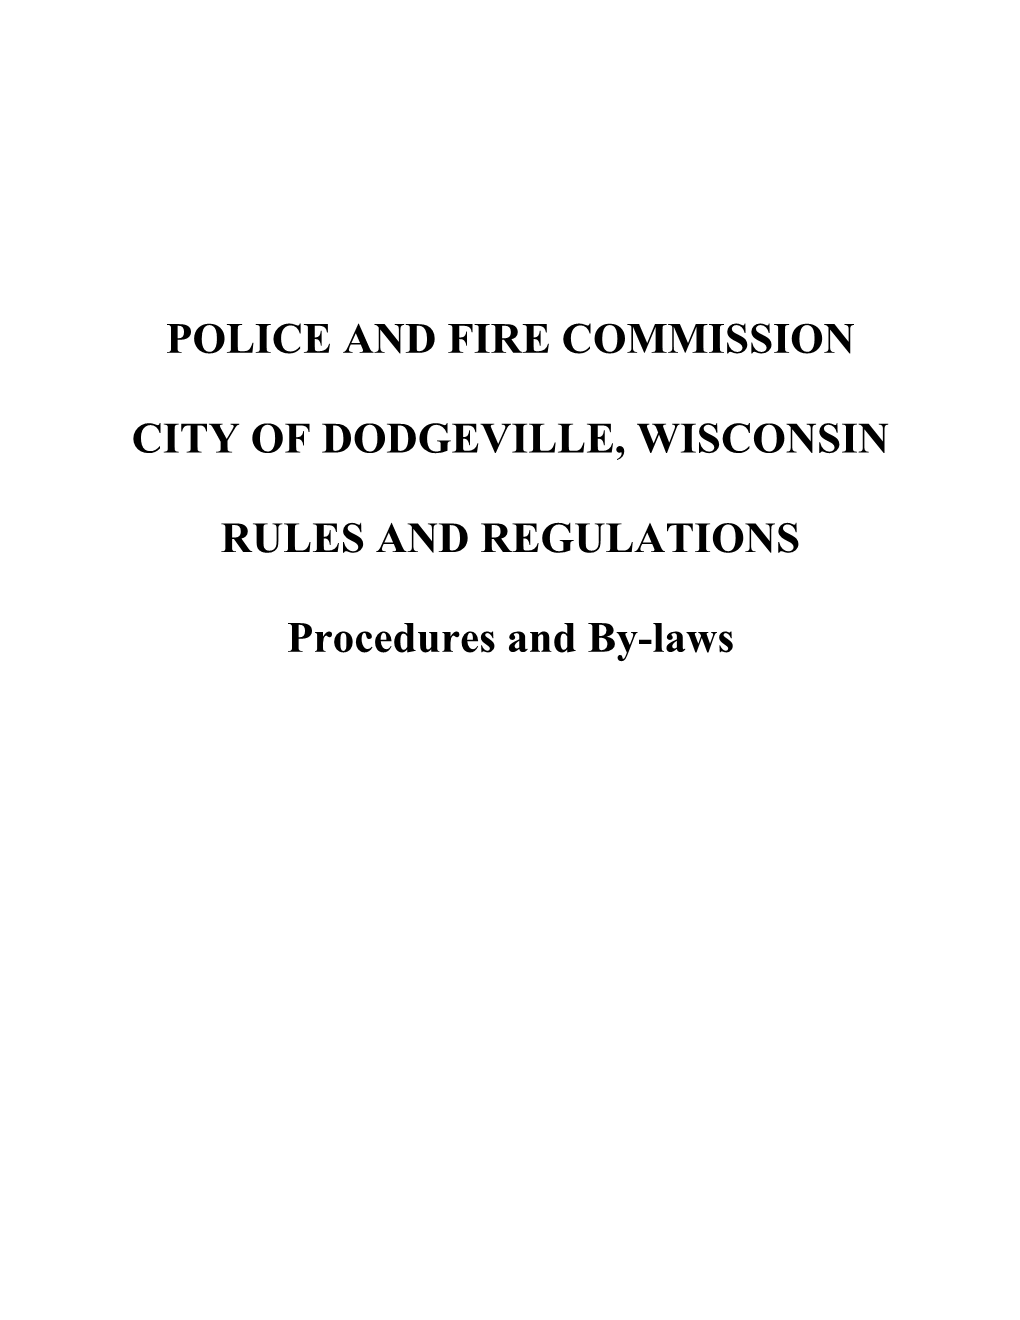 Police and Fire Commission